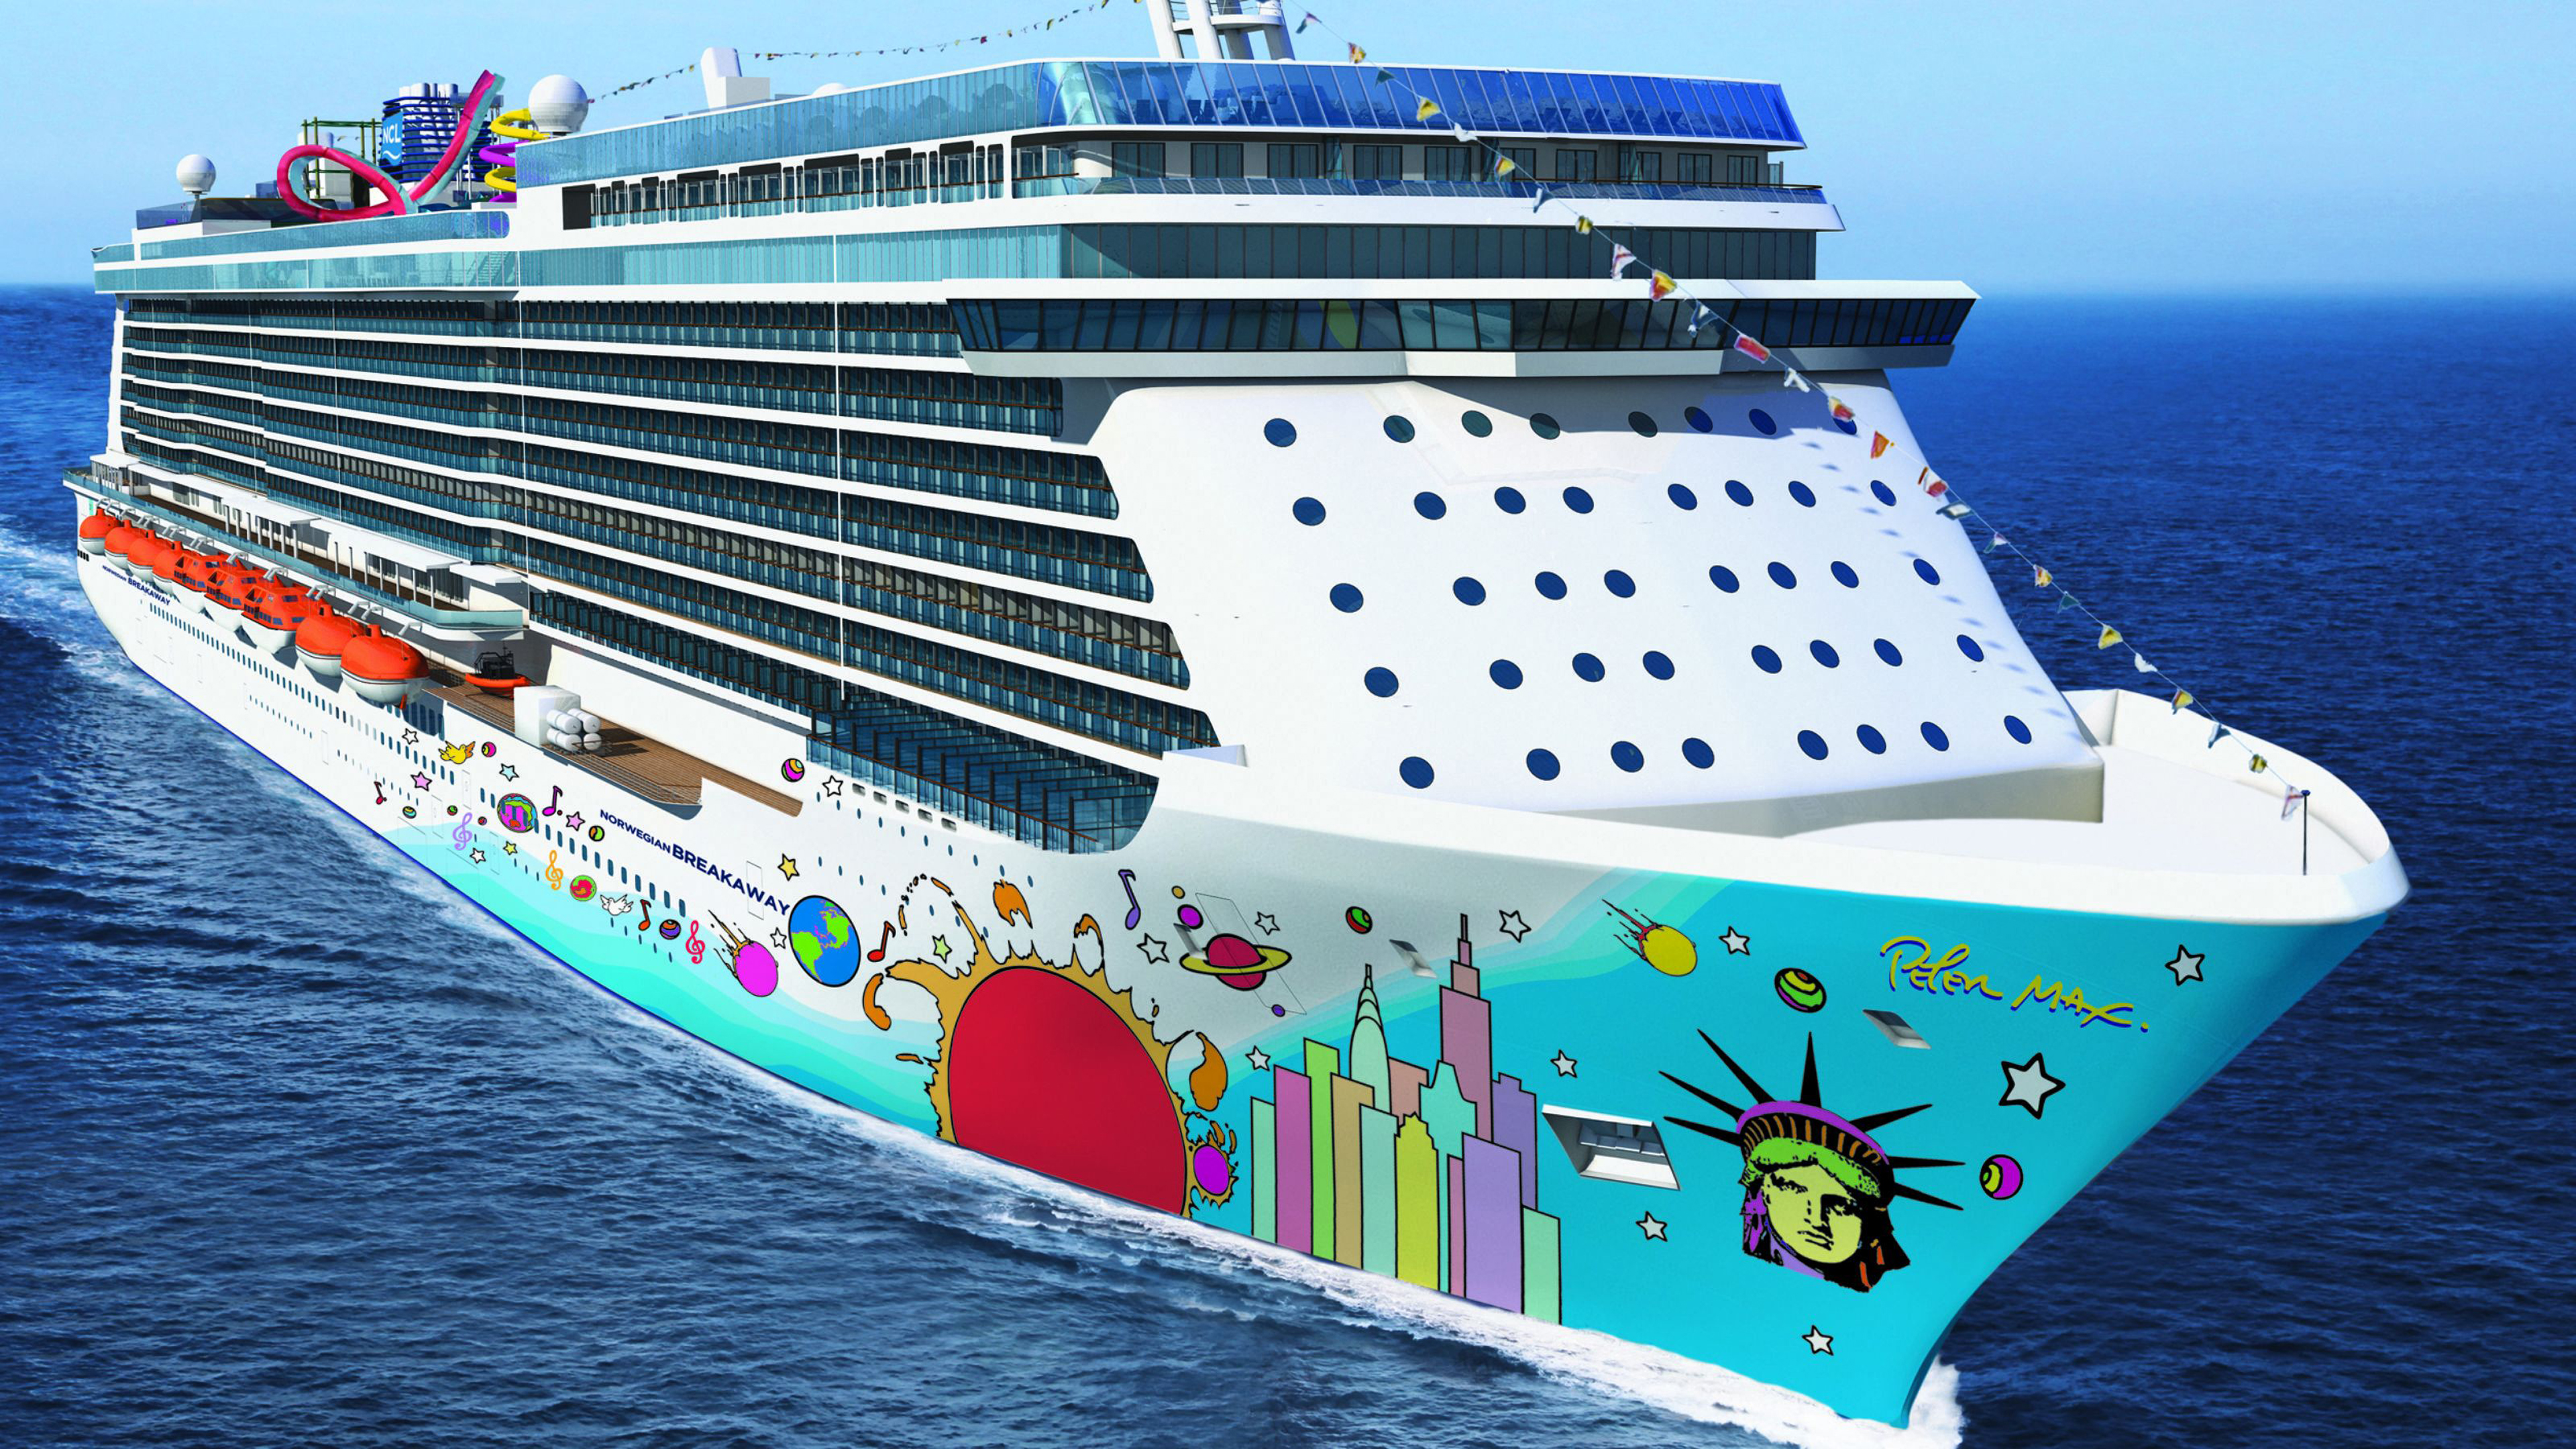 Cruise Ship With Colorful Paintings On Blue Sea K 2K Cruise Ship